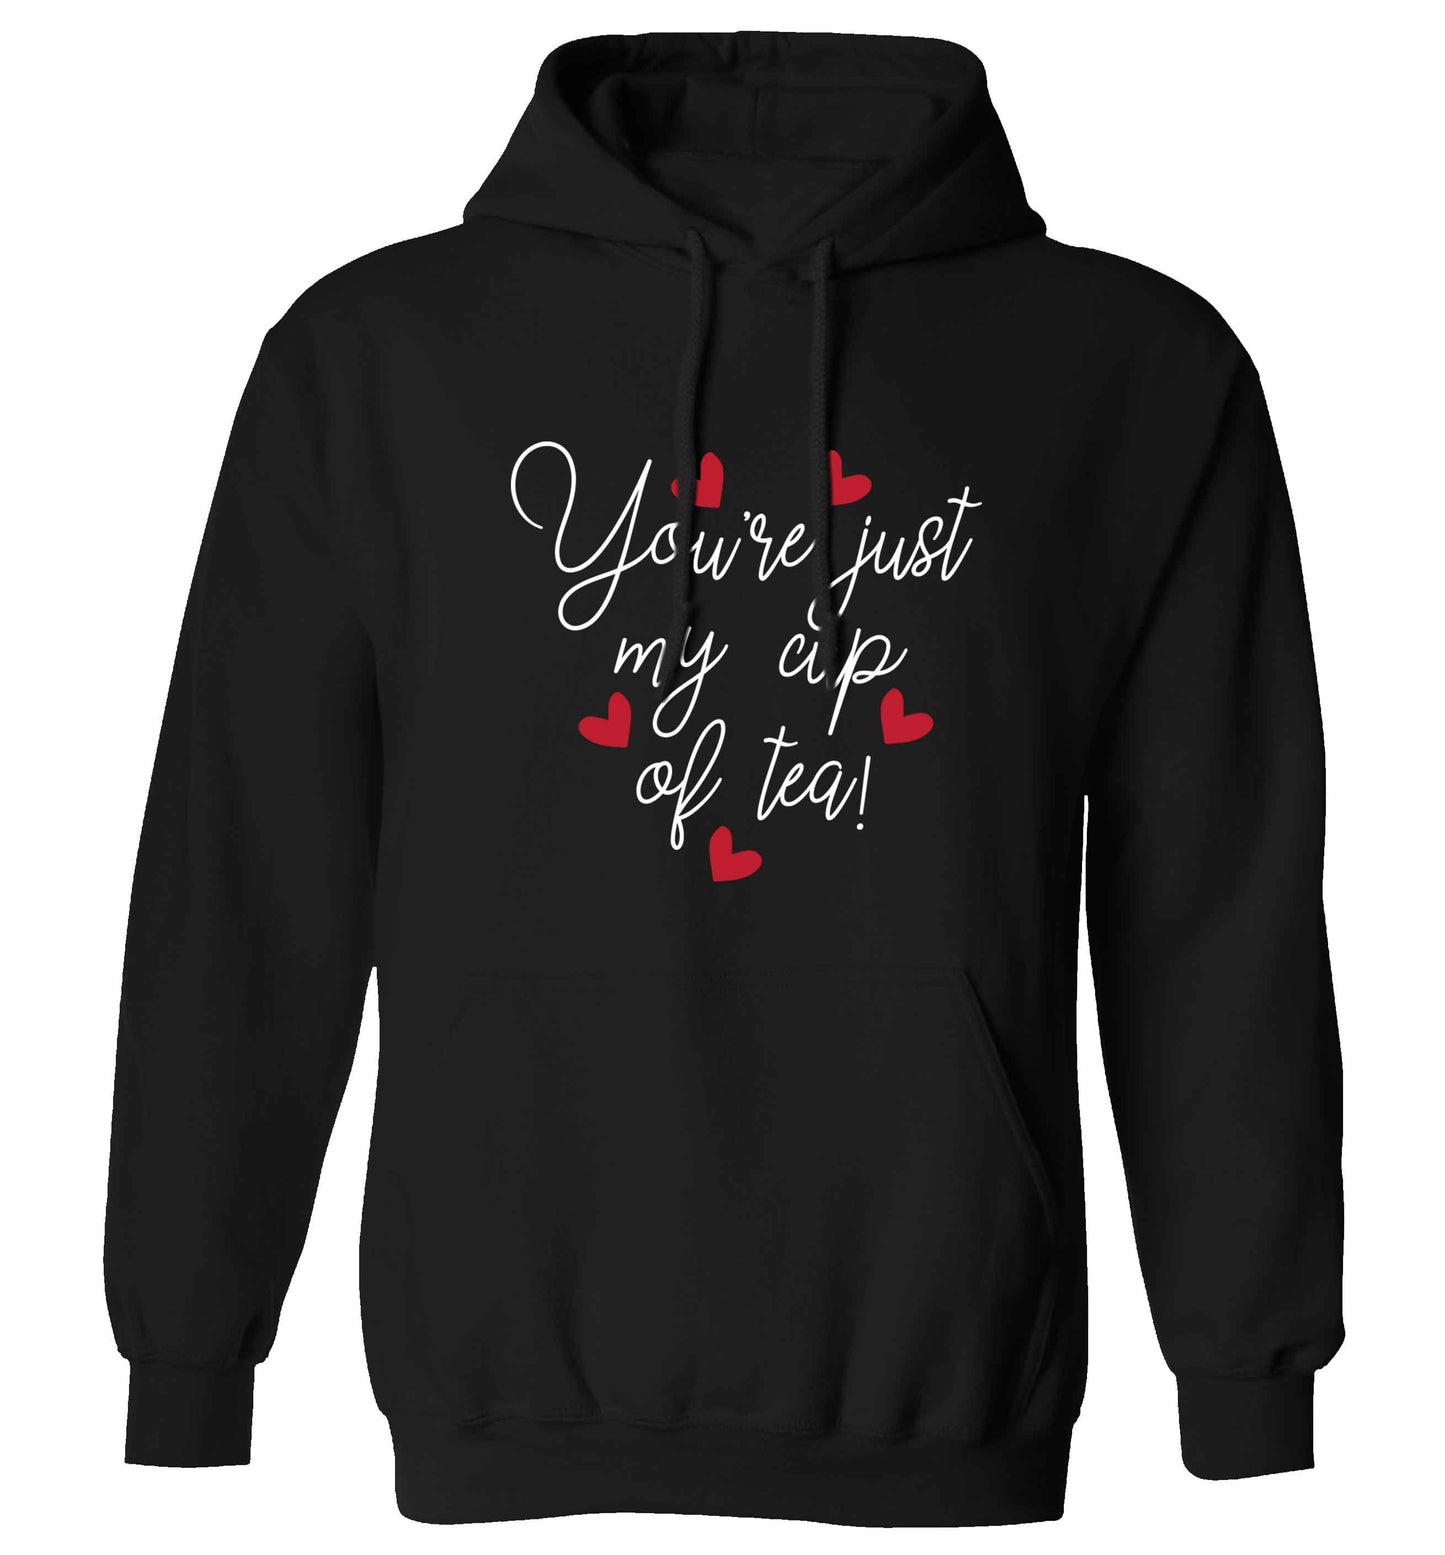 You're just my cup of tea adults unisex black hoodie 2XL